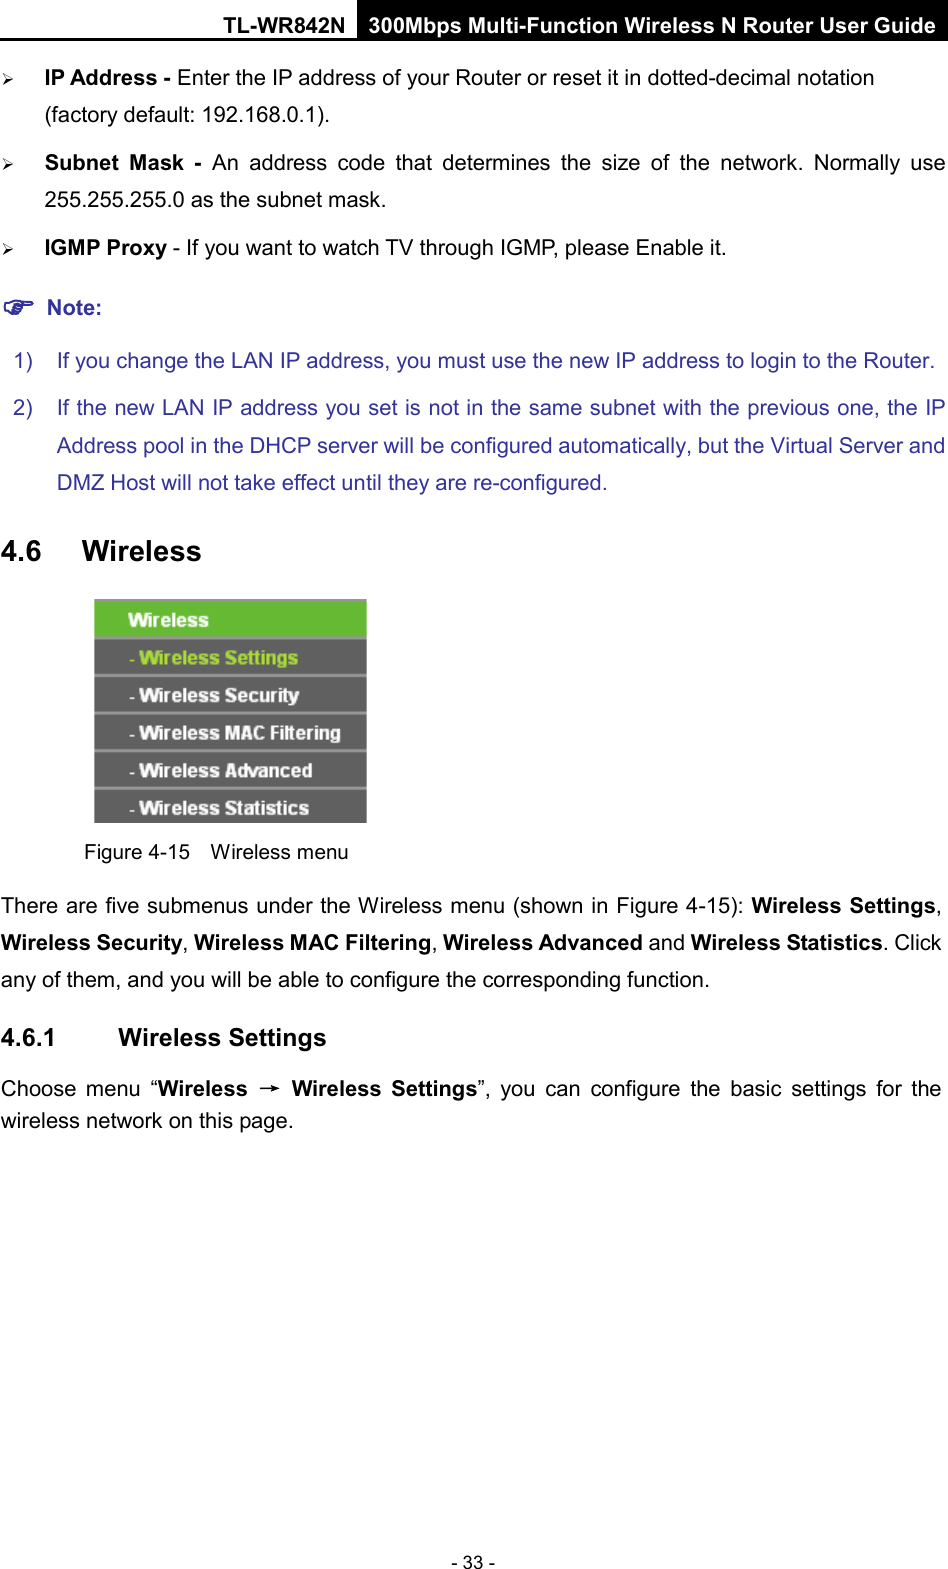 TL-WR842N 300Mbps Multi-Function Wireless N Router User Guide  - 33 -  IP Address - Enter the IP address of your Router or reset it in dotted-decimal notation (factory default: 192.168.0.1).  Subnet Mask - An address code that determines the size of the network. Normally use 255.255.255.0 as the subnet mask.    IGMP Proxy - If you want to watch TV through IGMP, please Enable it.  Note: 1) If you change the LAN IP address, you must use the new IP address to login to the Router.   2) If the new LAN IP address you set is not in the same subnet with the previous one, the IP Address pool in the DHCP server will be configured automatically, but the Virtual Server and DMZ Host will not take effect until they are re-configured. 4.6  Wireless  Figure 4-15  Wireless menu There are five submenus under the Wireless menu (shown in Figure 4-15): Wireless Settings, Wireless Security, Wireless MAC Filtering, Wireless Advanced and Wireless Statistics. Click any of them, and you will be able to configure the corresponding function.   4.6.1 Wireless Settings Choose menu “Wireless → Wireless Settings”, you can configure the basic settings for the wireless network on this page. 